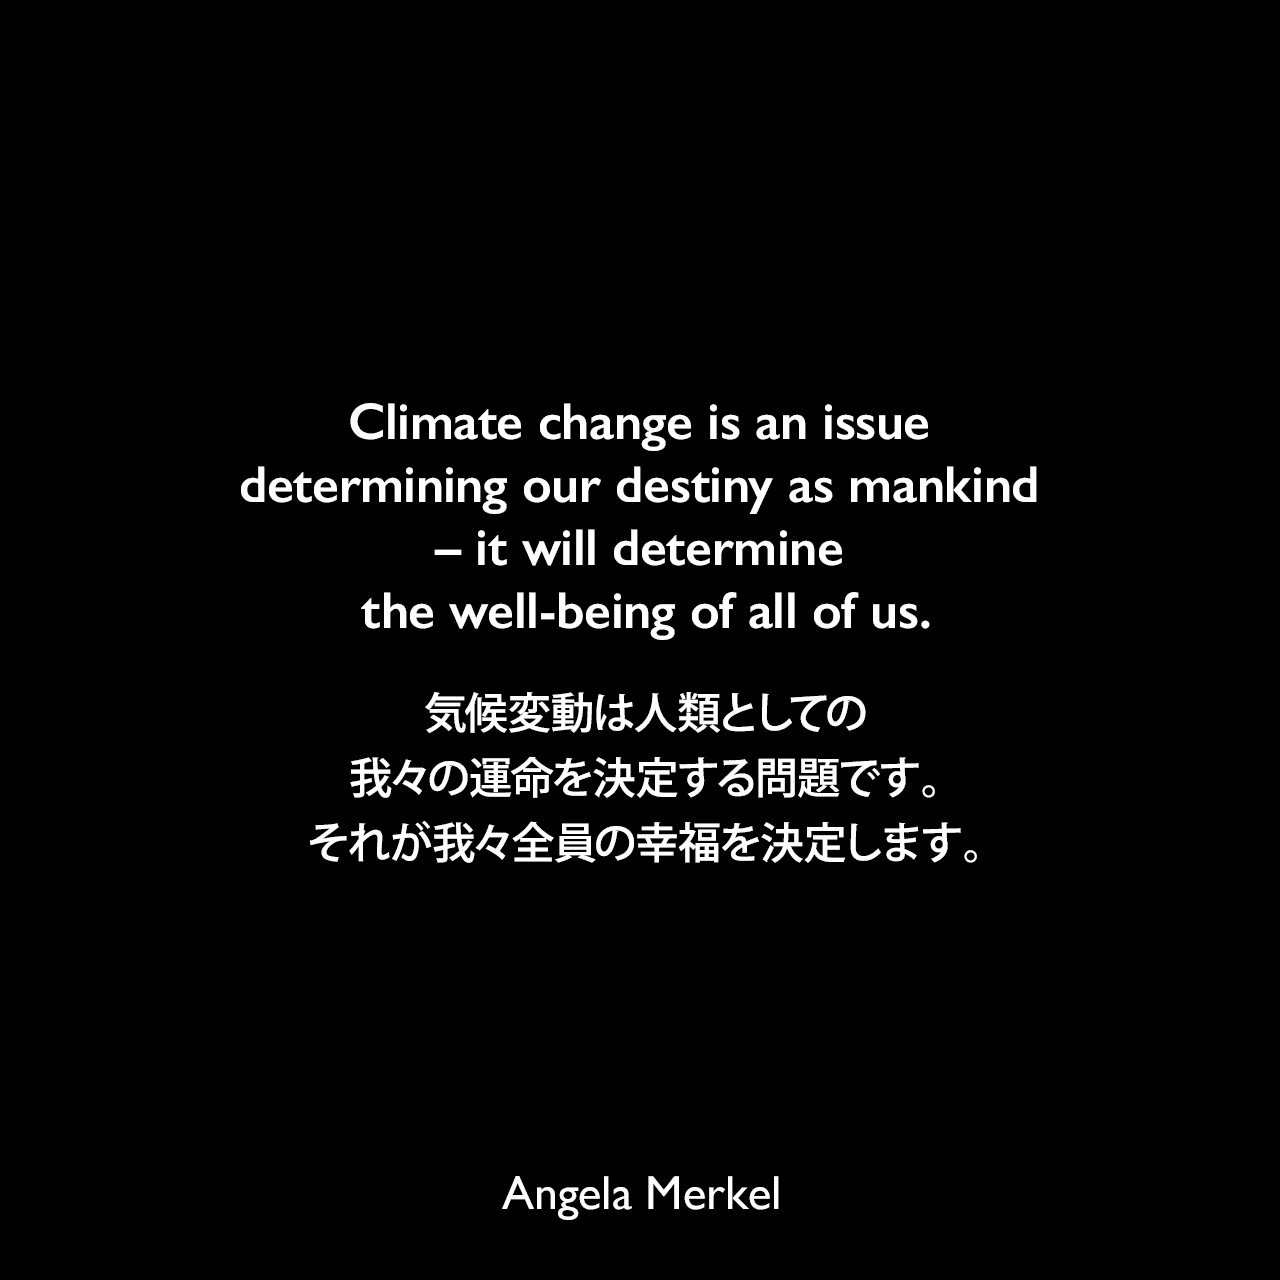 Climate change is an issue determining our destiny as mankind – it will determine the well-being of all of us.気候変動は人類としての我々の運命を決定する問題です。それが我々全員の幸福を決定します。- 2017年11月15日、イギリスの新聞「ガーディアン」よりAngela Merkel